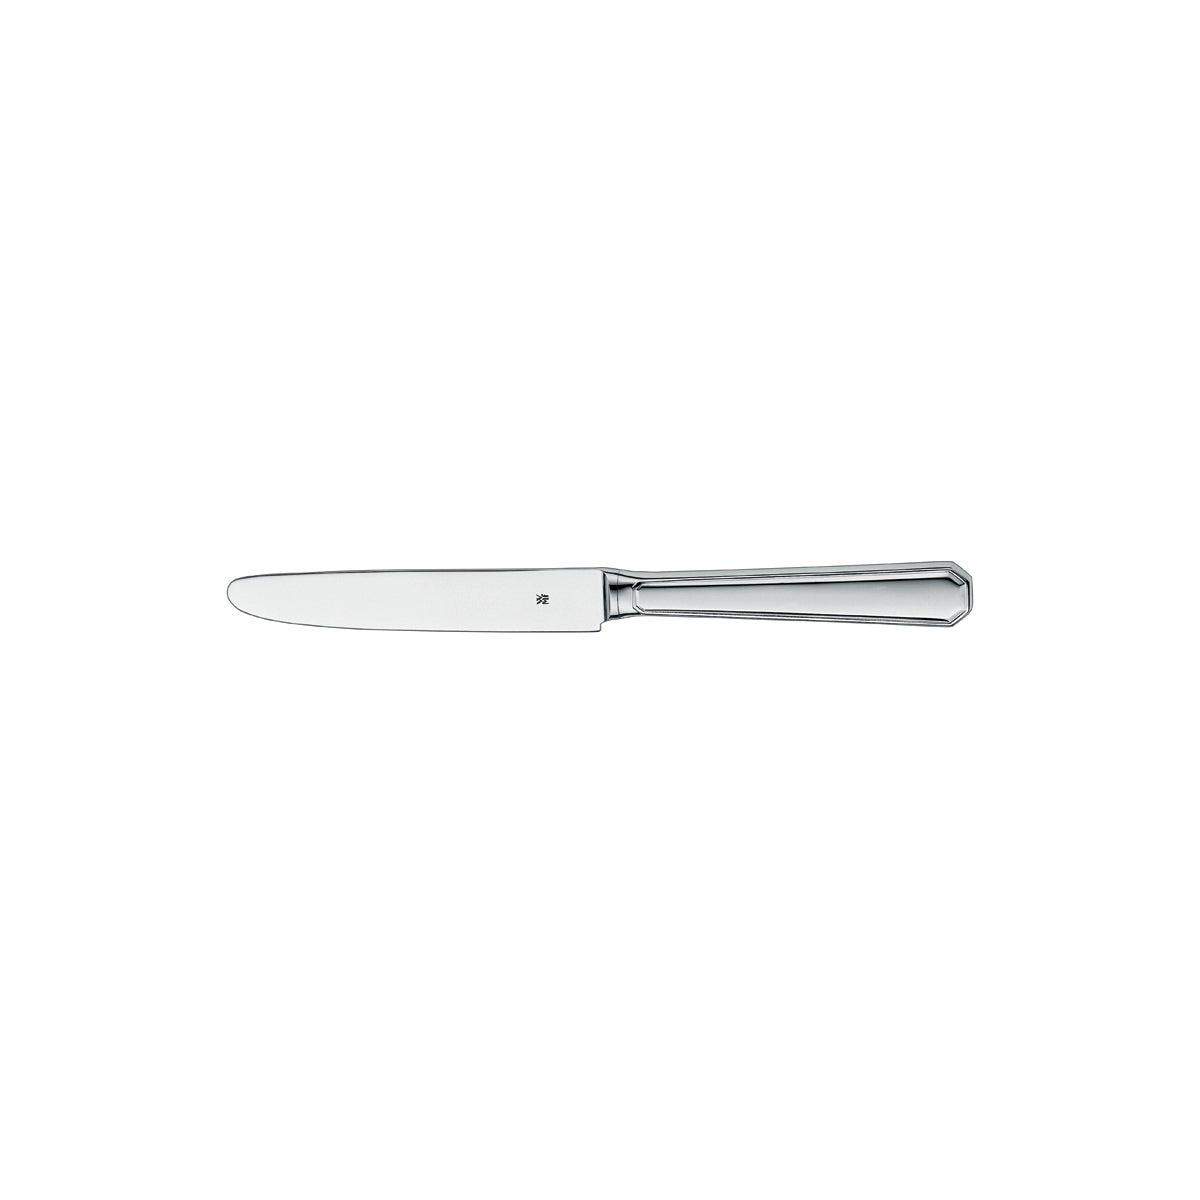 10.6203.6067 WMF Mondial Table Knife - Hollow Handle Silverplated Tomkin Australia Hospitality Supplies